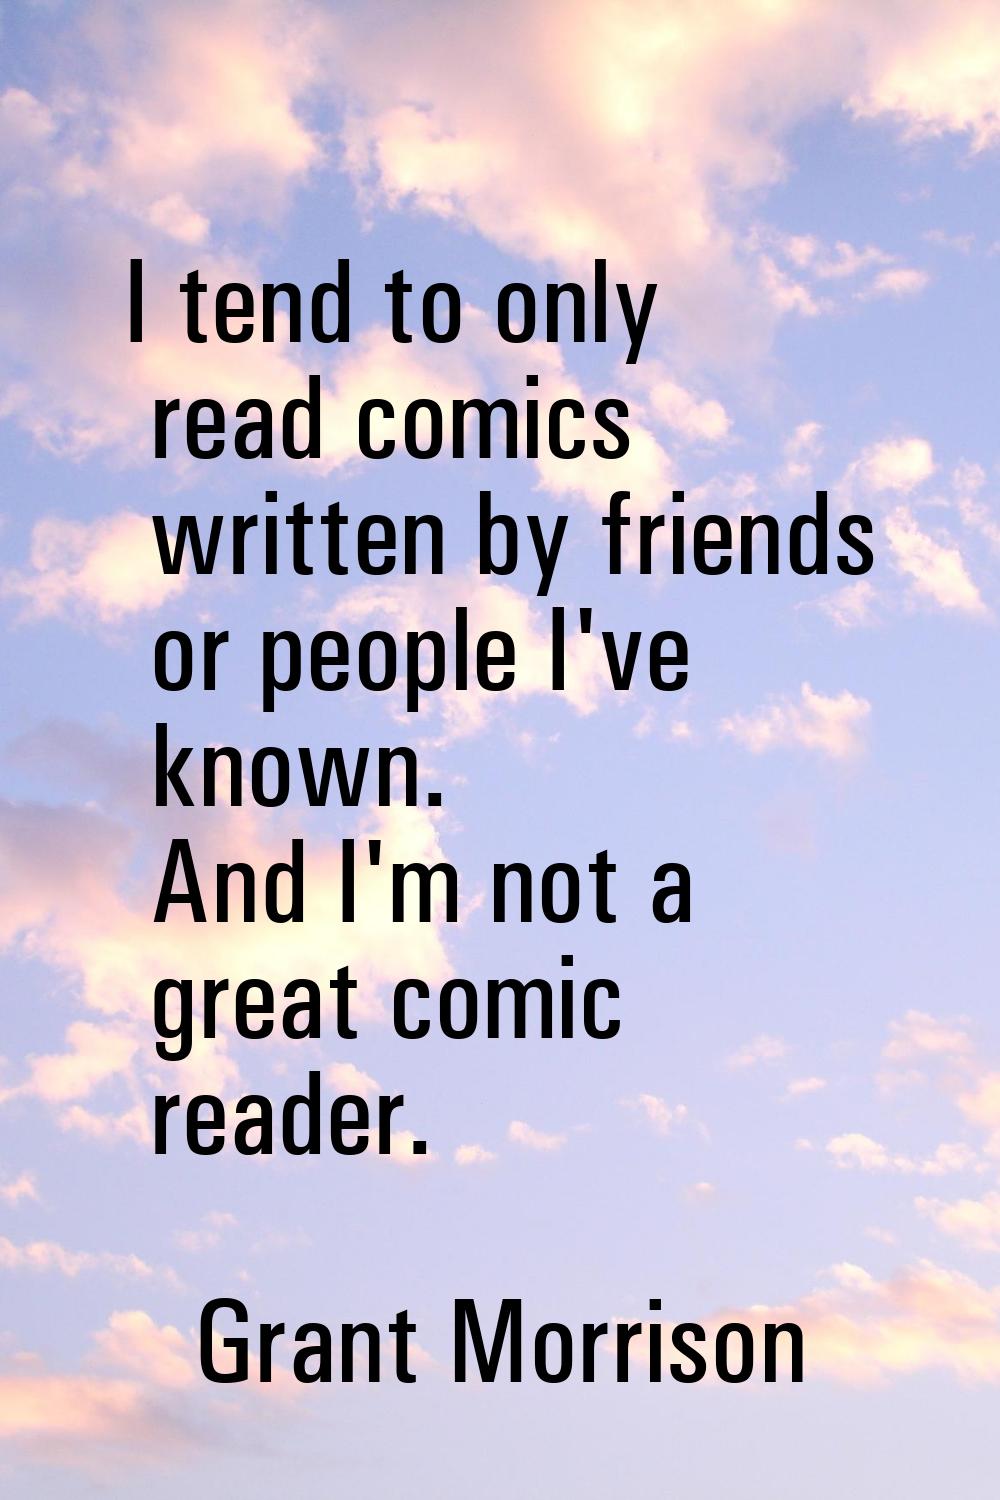 I tend to only read comics written by friends or people I've known. And I'm not a great comic reade